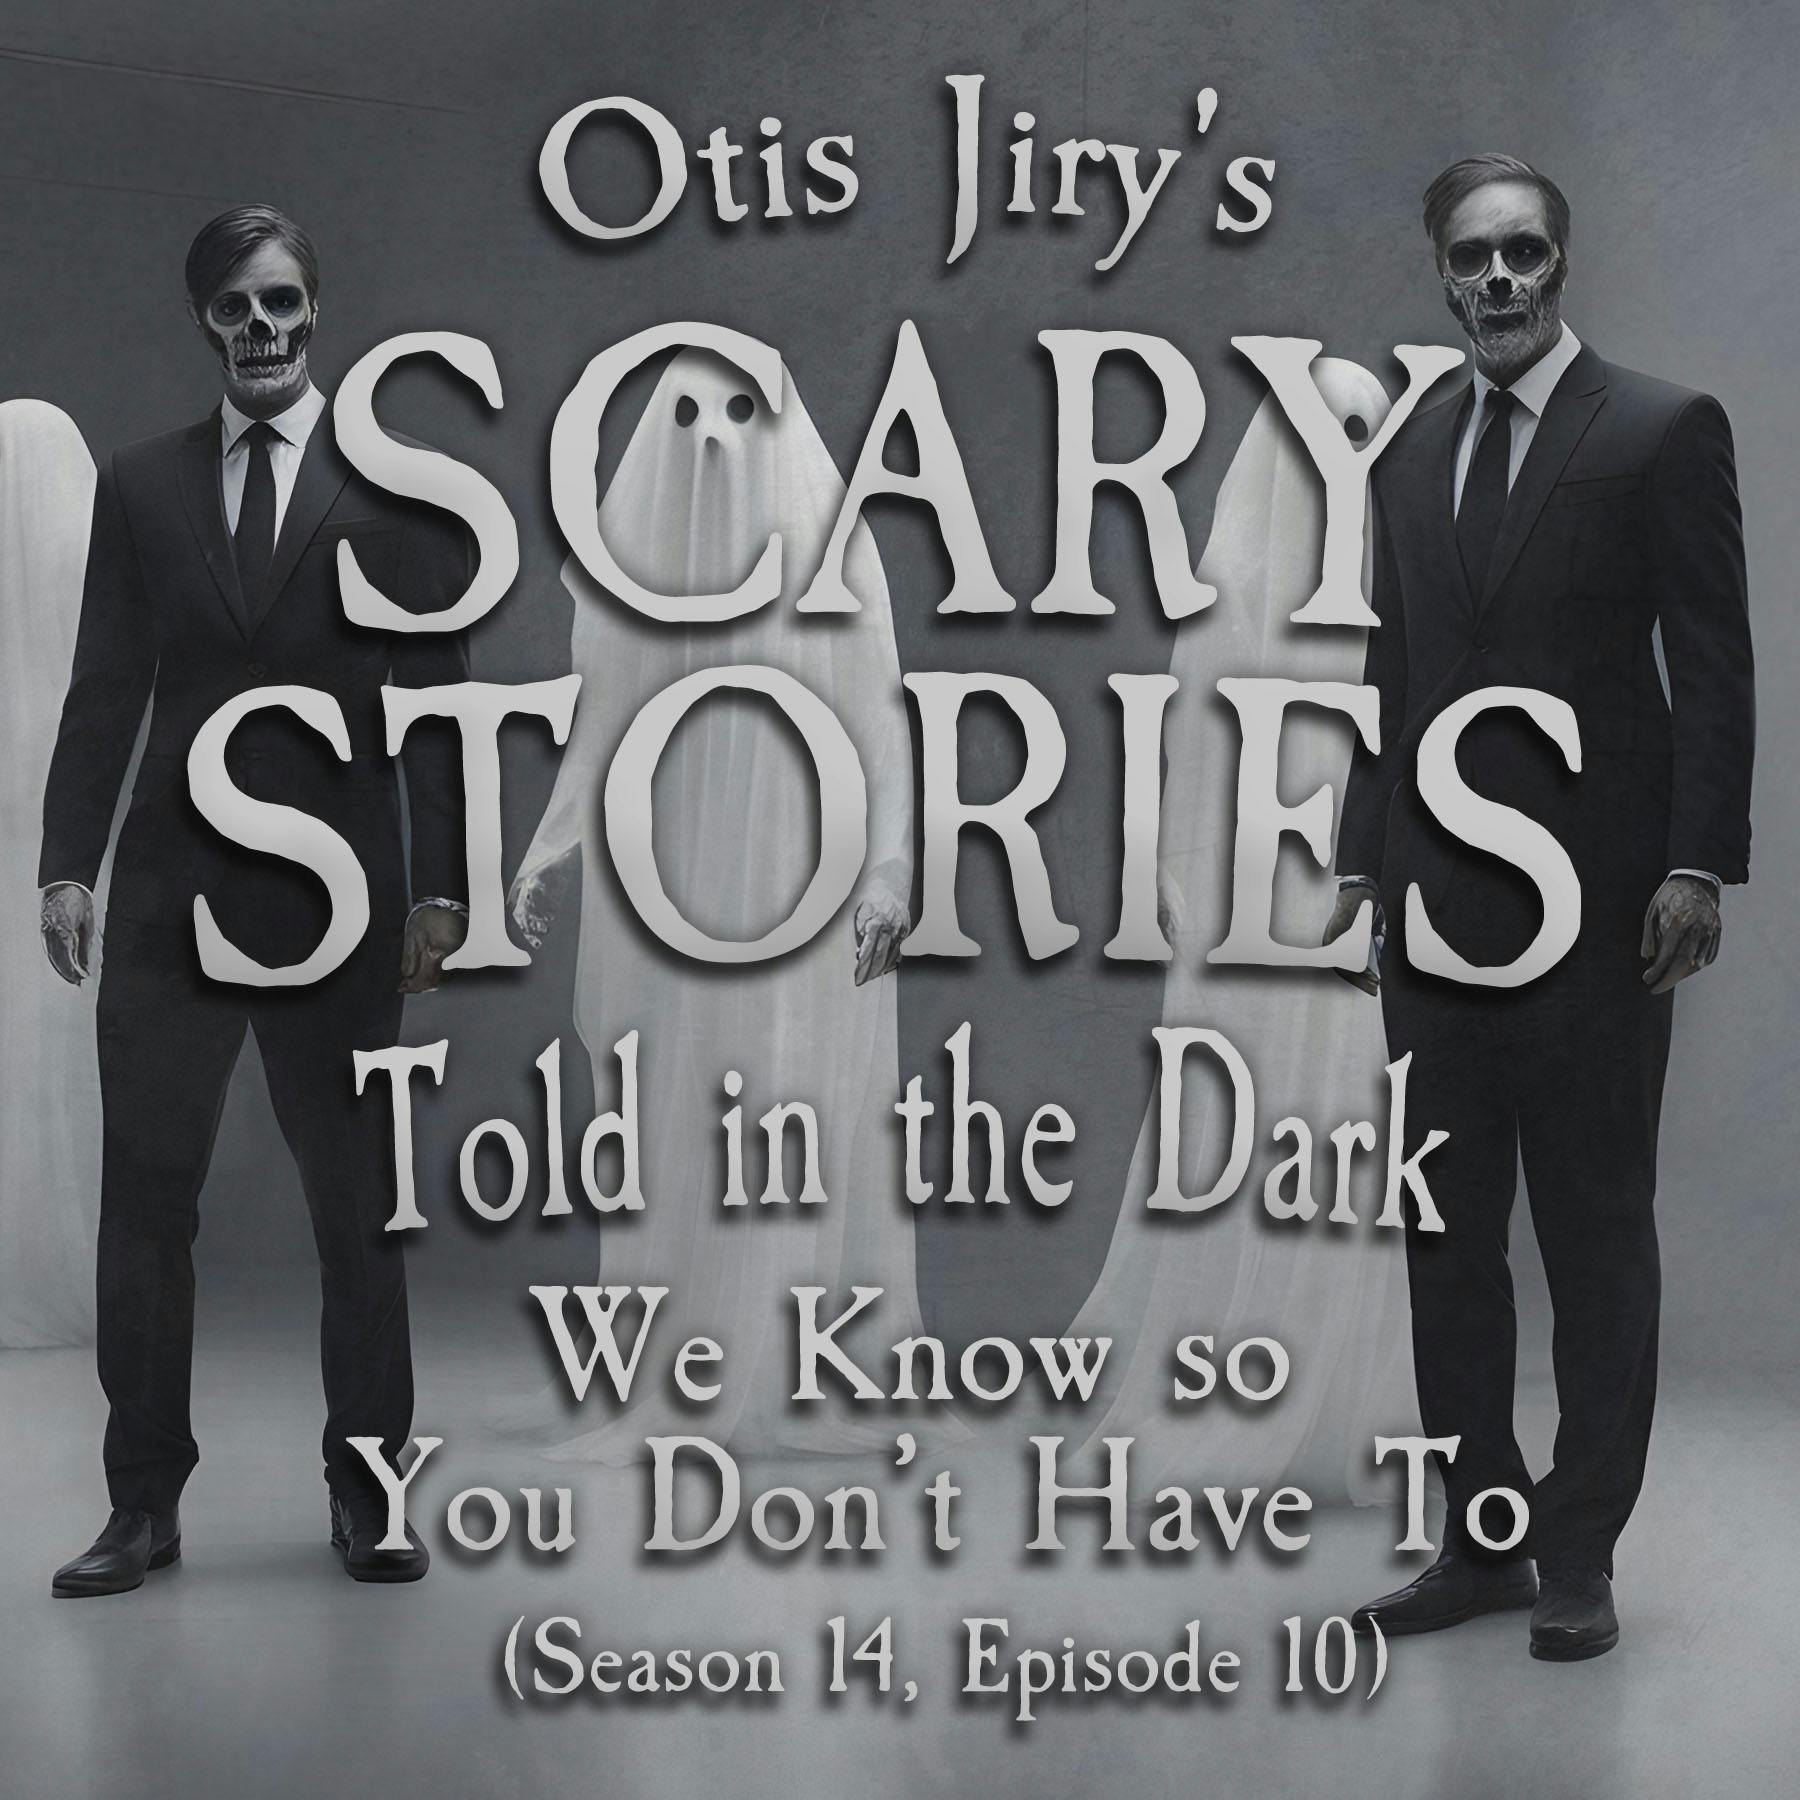 S14E11 - ”We Know So You Don’t Have To” – Scary Stories Told in the Dark